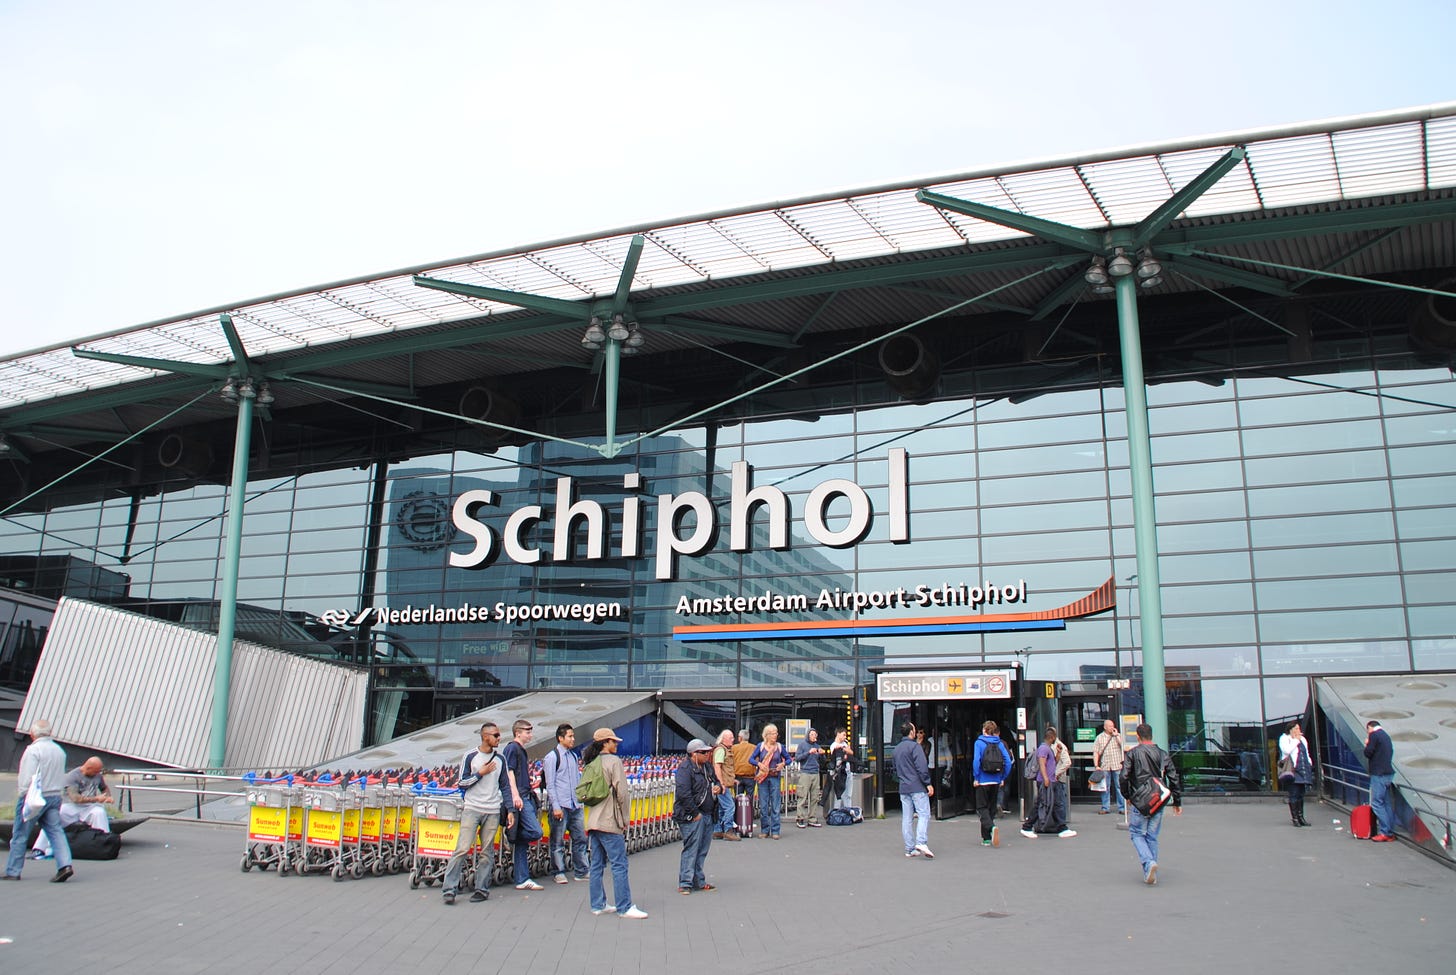 Schiphol Airport – Travel guide at Wikivoyage